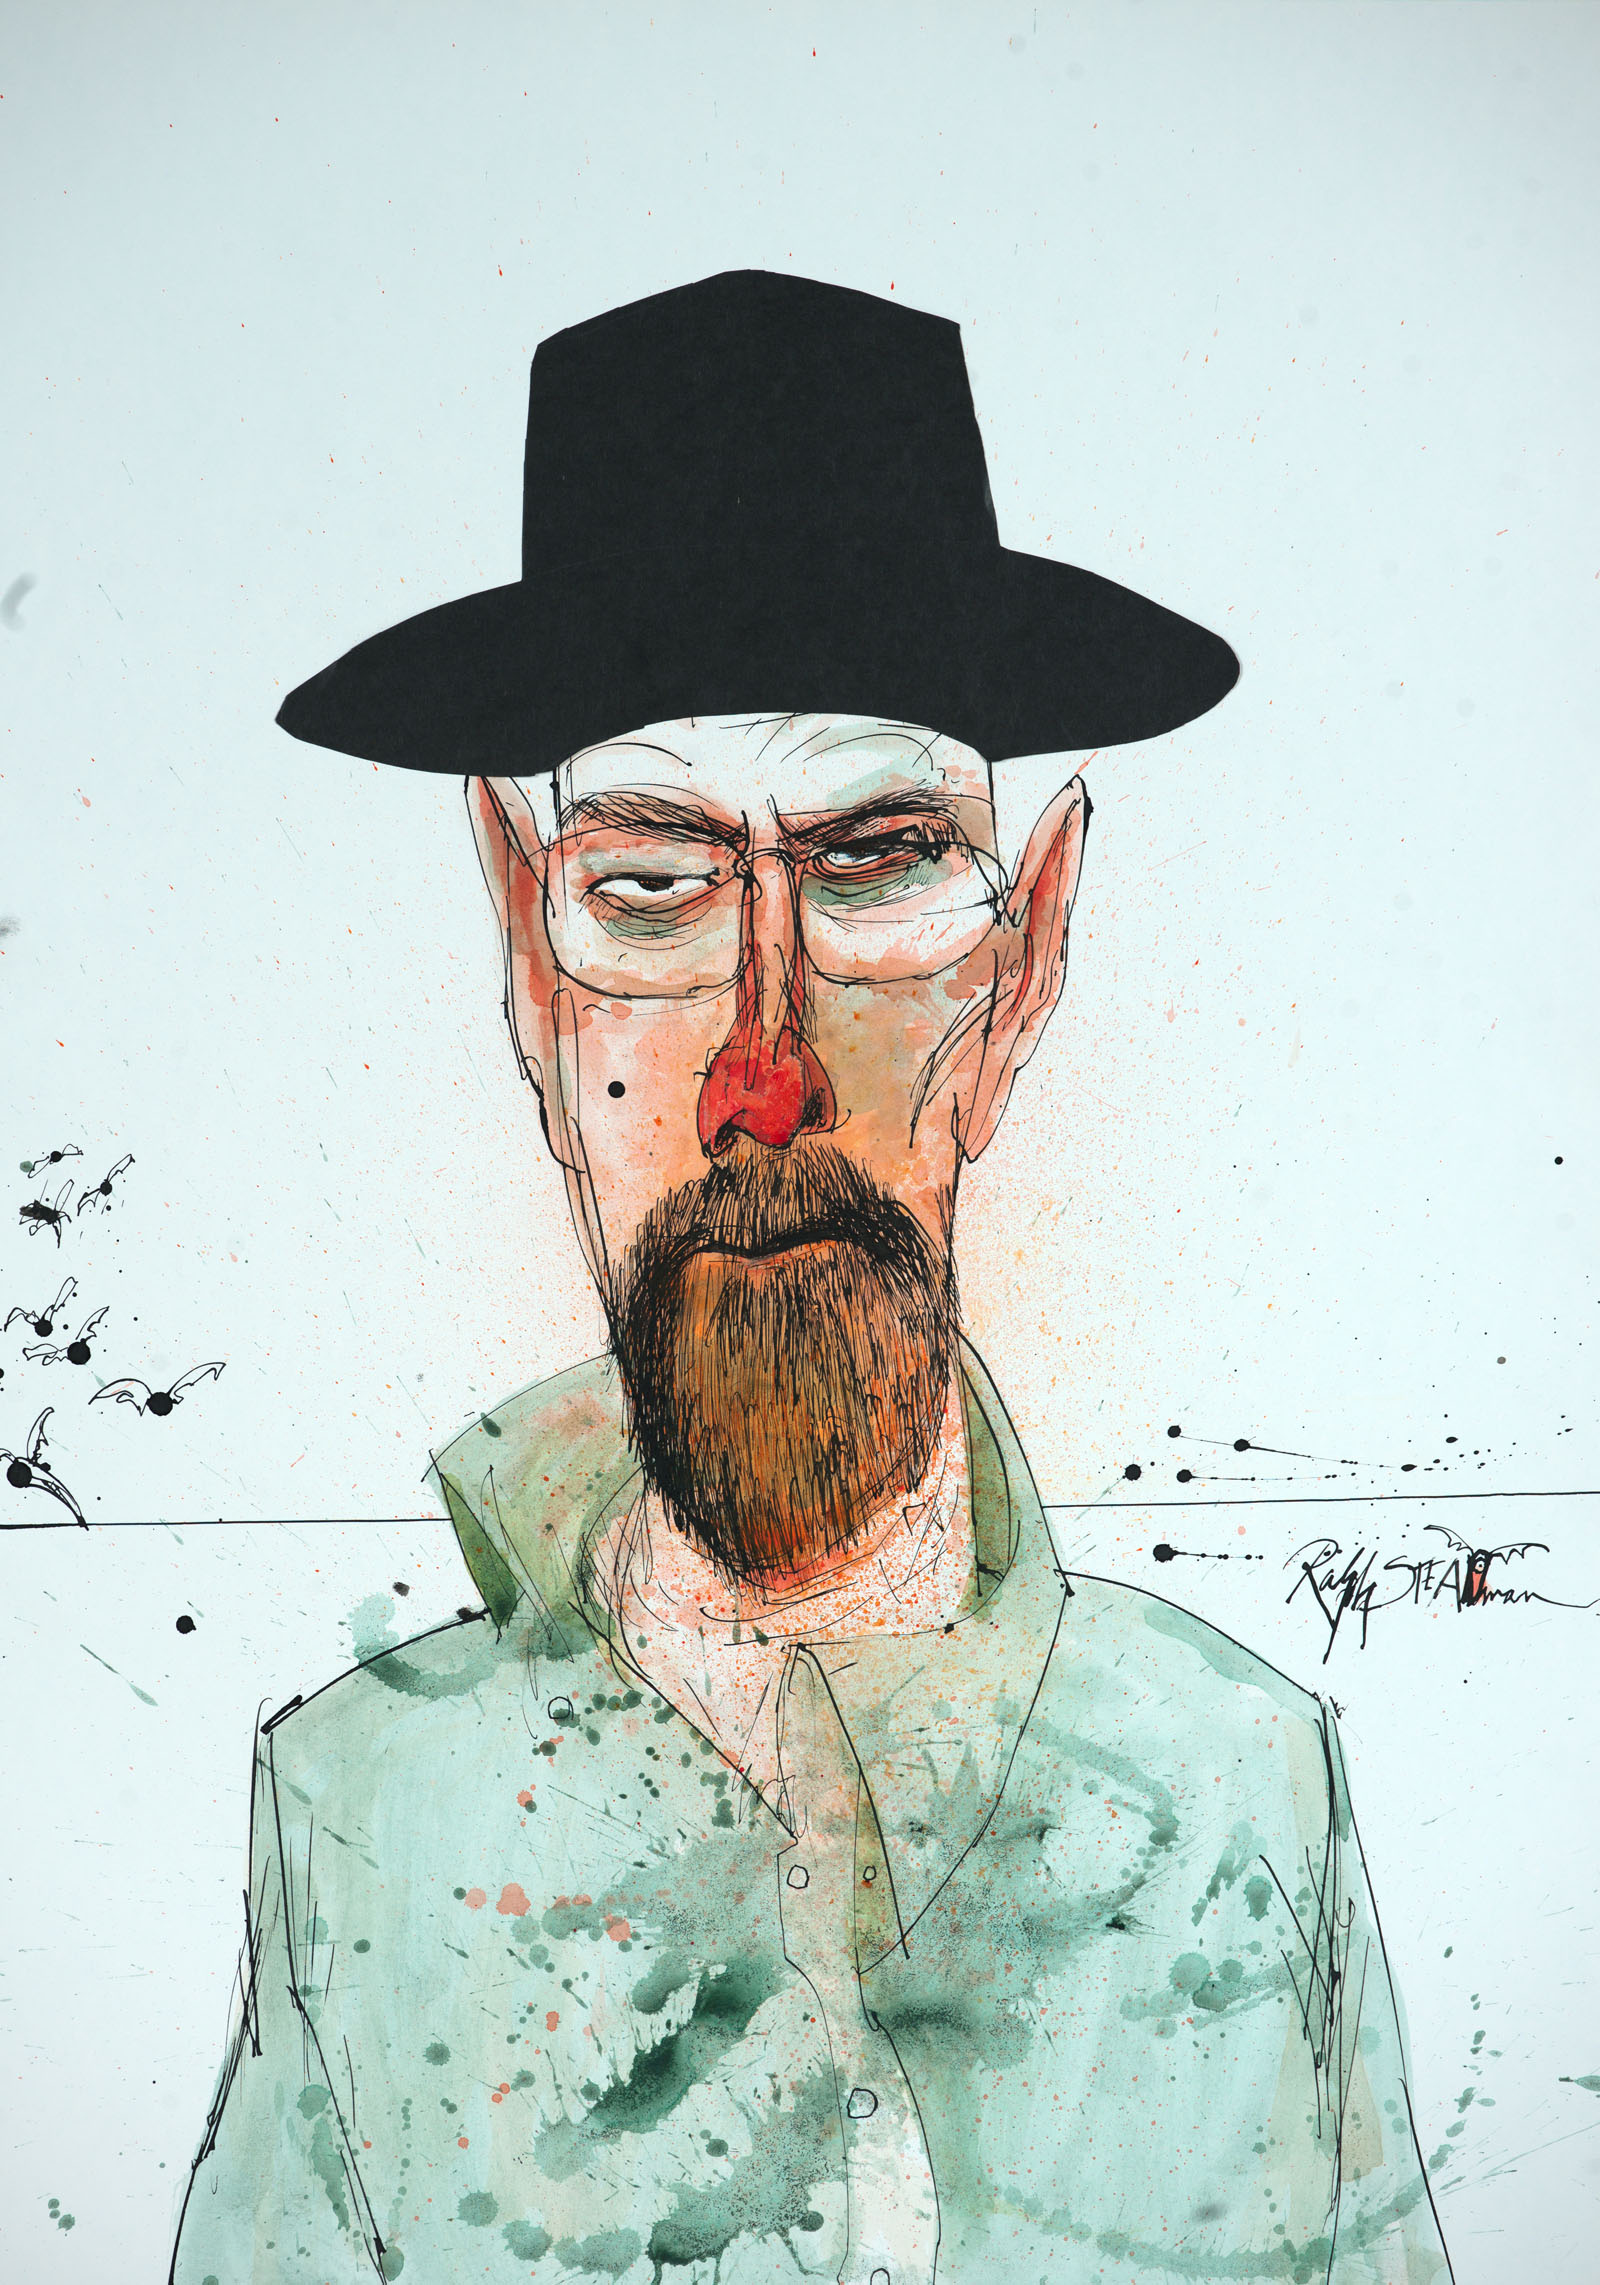 A portrait of the character, Walter White from the TV show, Breaking Bad by Ralph Steadman